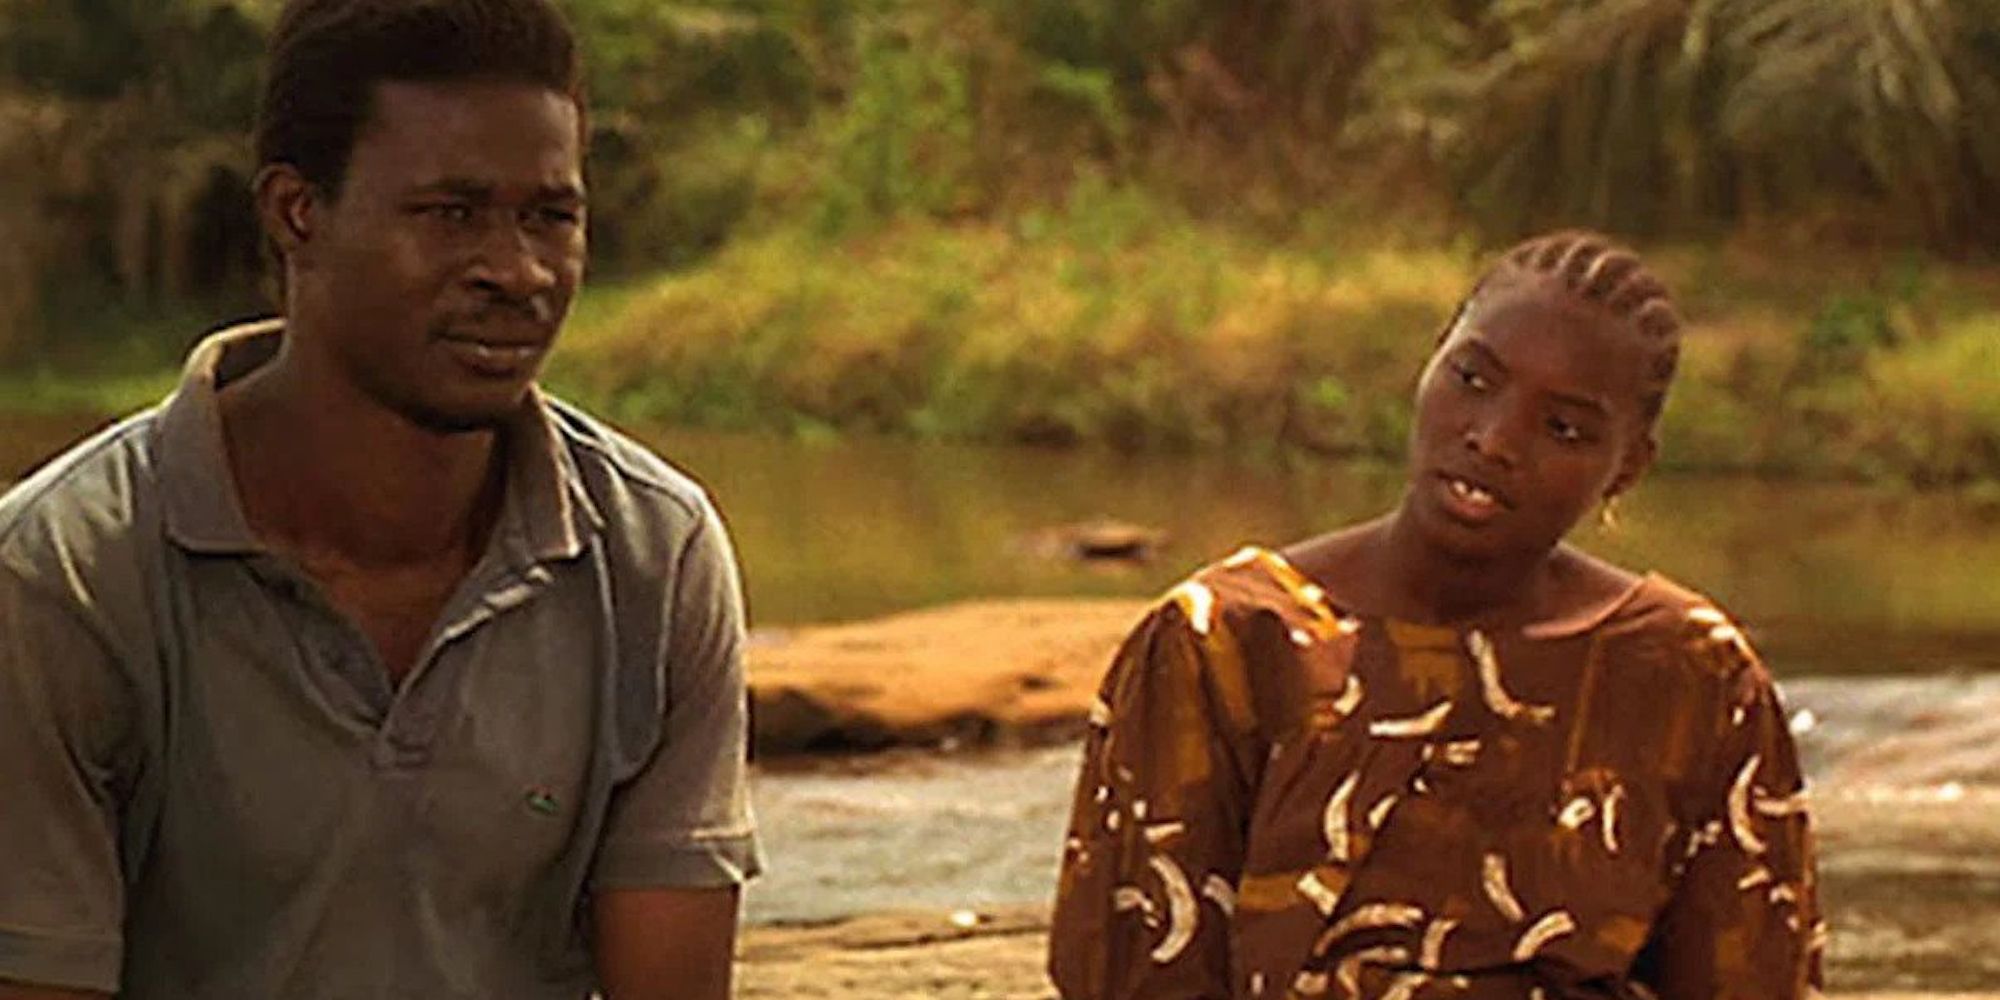 A woman looking at a pensive-looking man in the film Samba Traoré